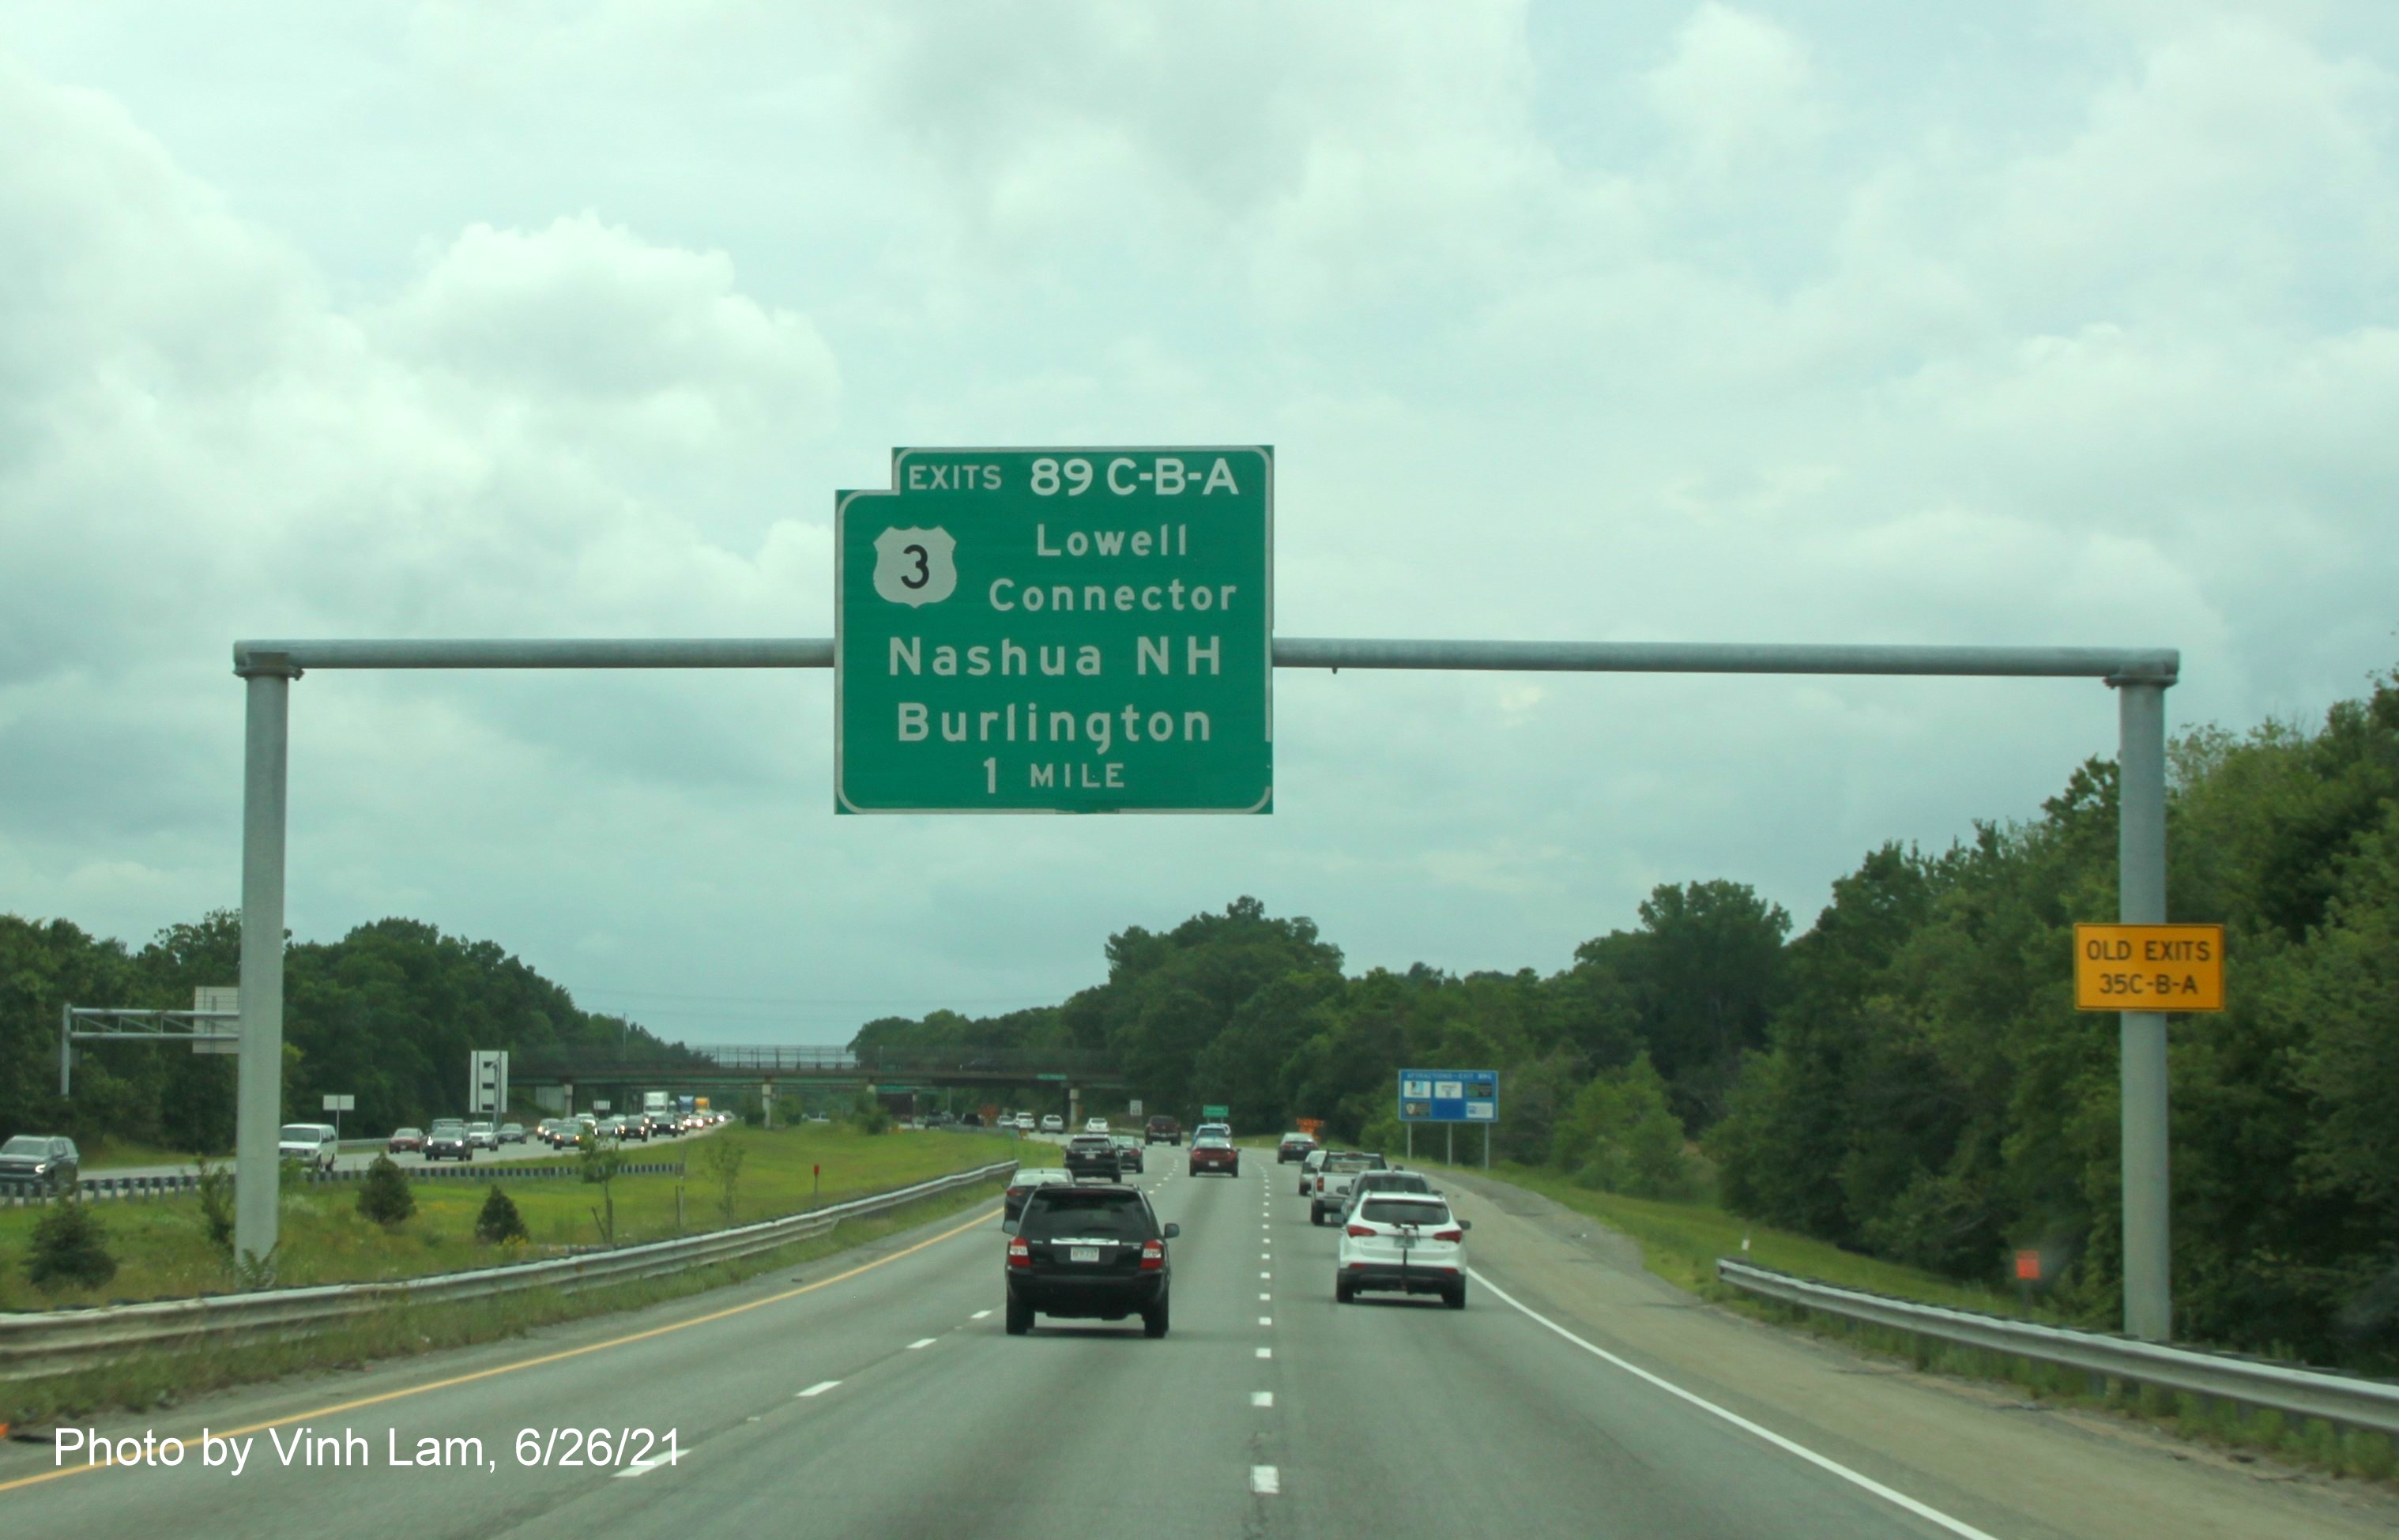 Image of 1 mile advance overhead sign for US 3/Lowell Connector exits with new milepost based exit numbers on I-495 South in Chelmsford, June 2021